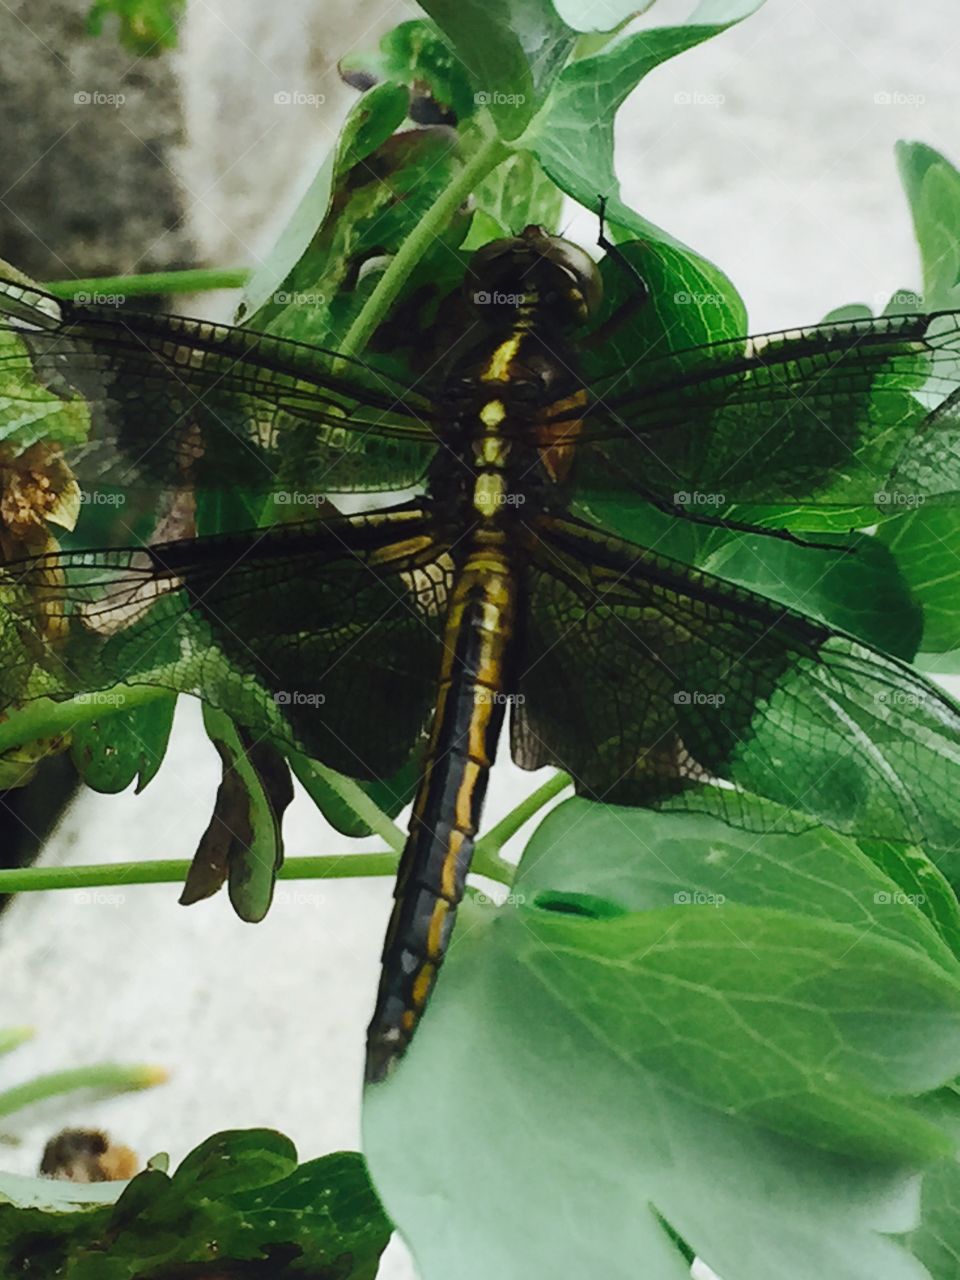 Beautiful Dragonfly. I found this dragonfly tangled in a spiderweb and set him free